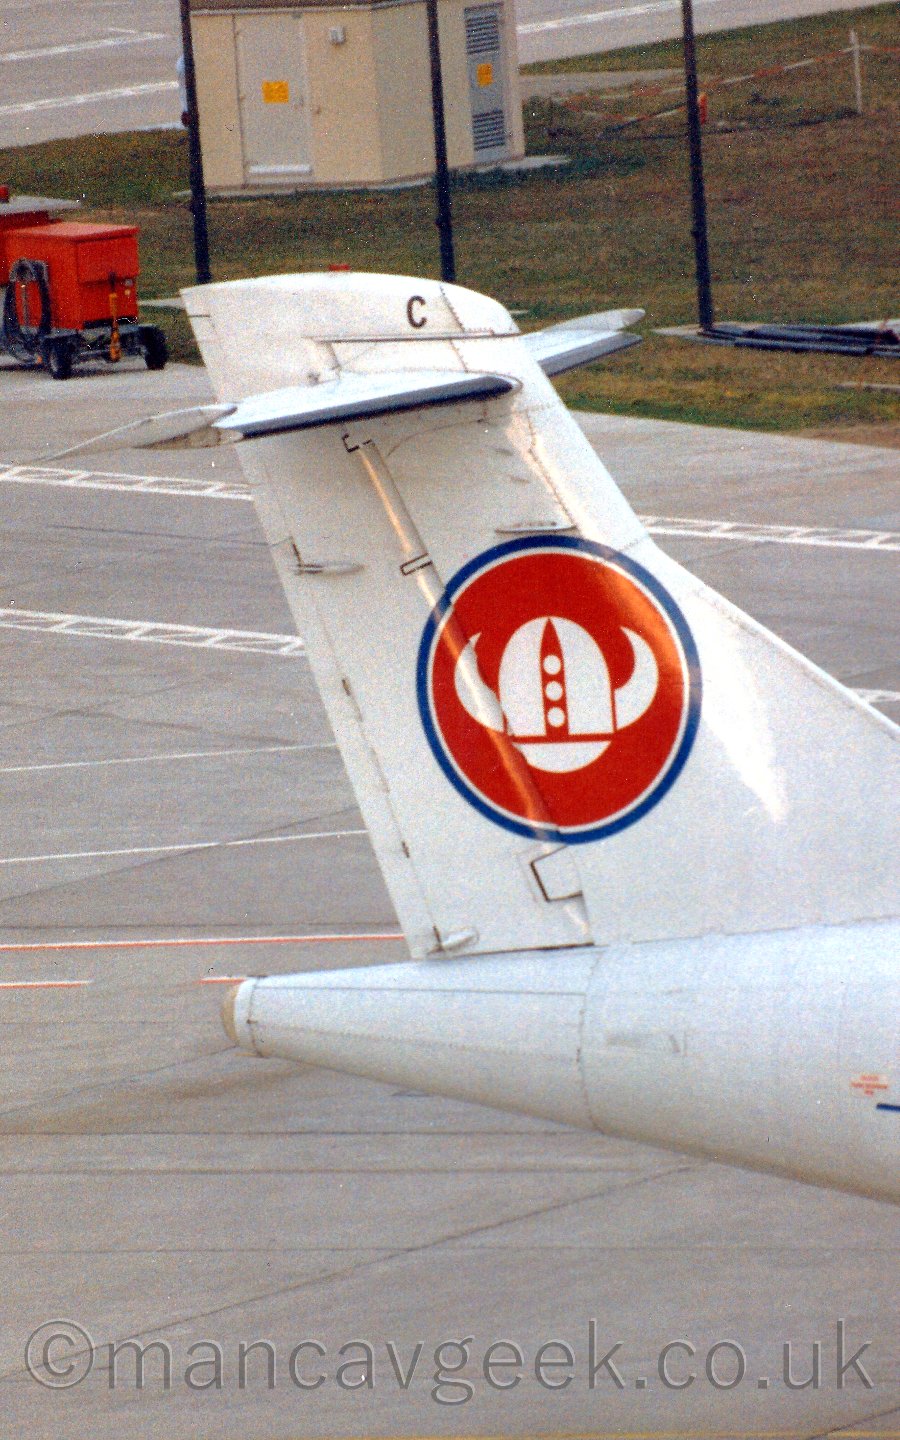 Closeup of the tail of a T-tailed propellor-engined airliner parked facing to the right. The plane is mostly white, with a red circle outlined in blue and overlaid with a white, horned viking helmet.